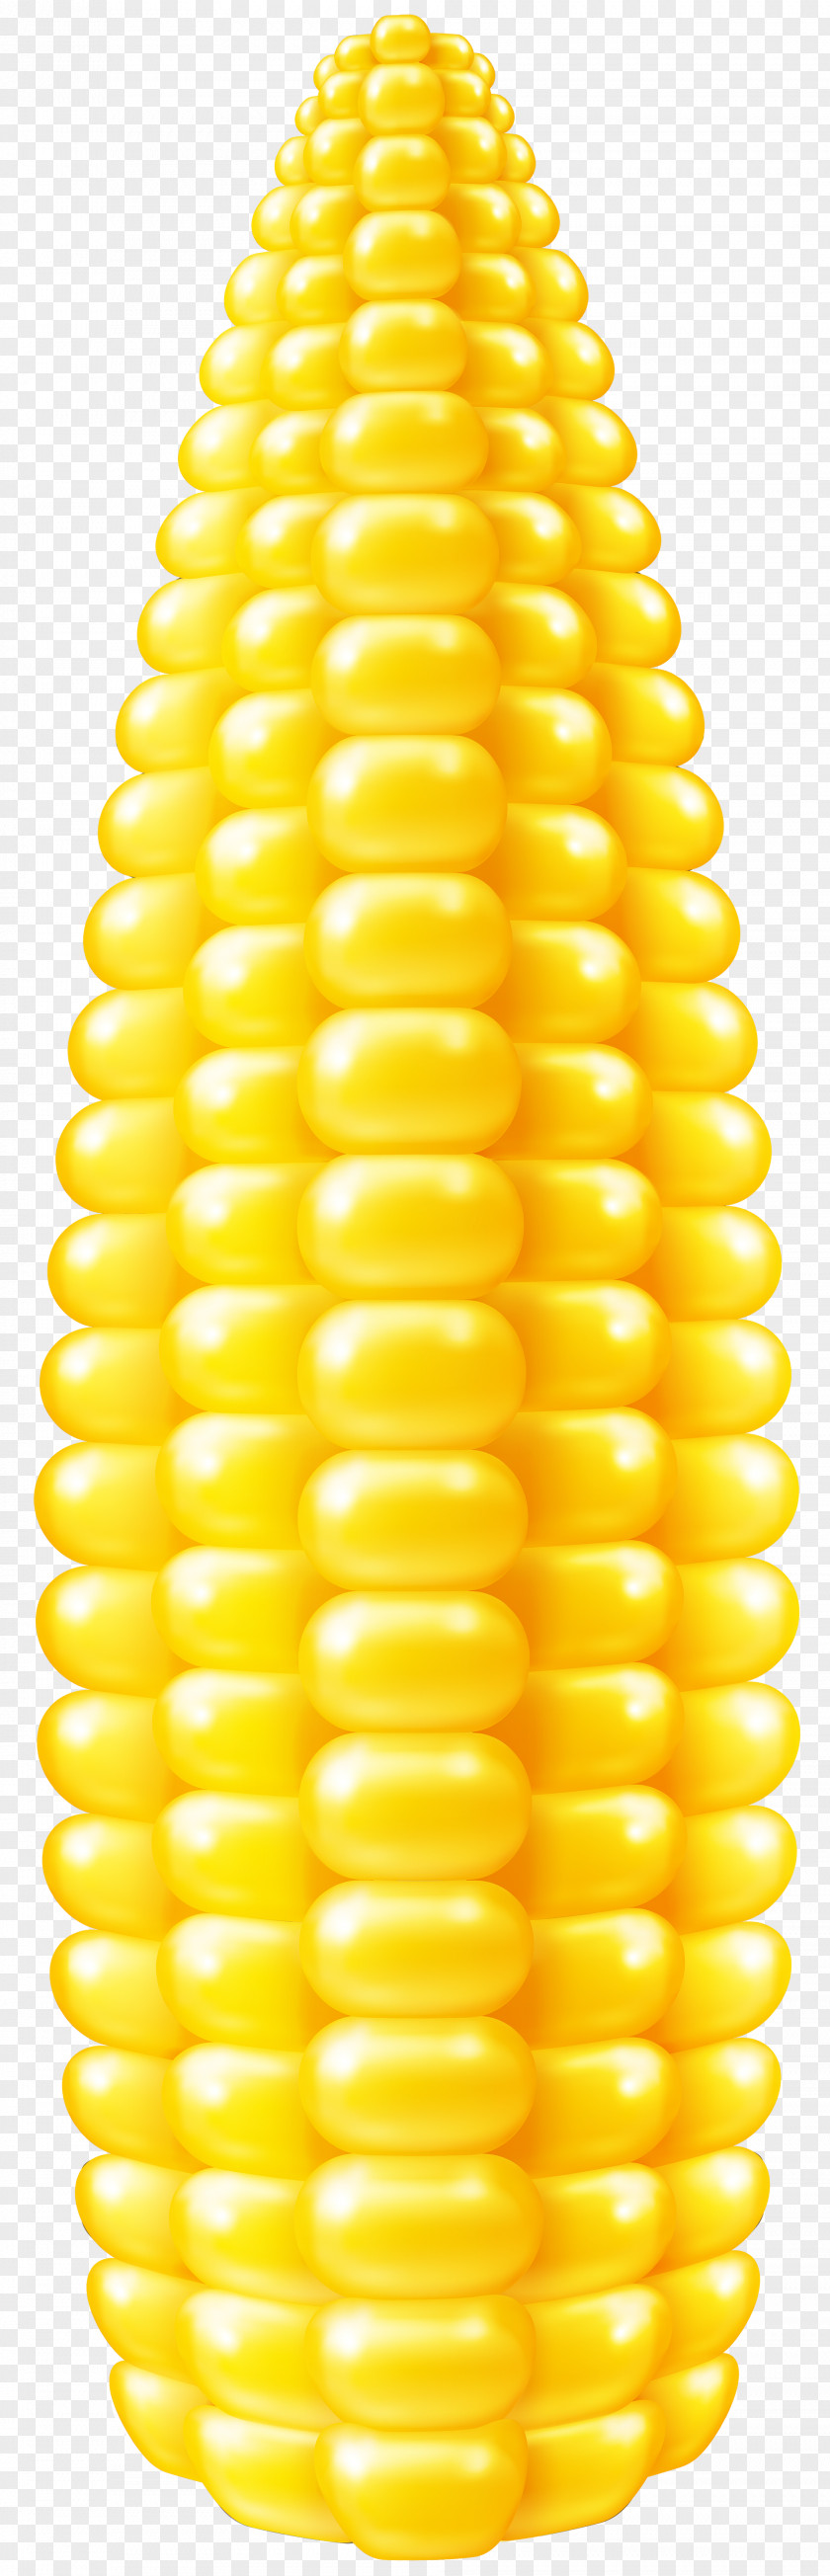 Corn On The Cob Drawing Maize Clip Art PNG